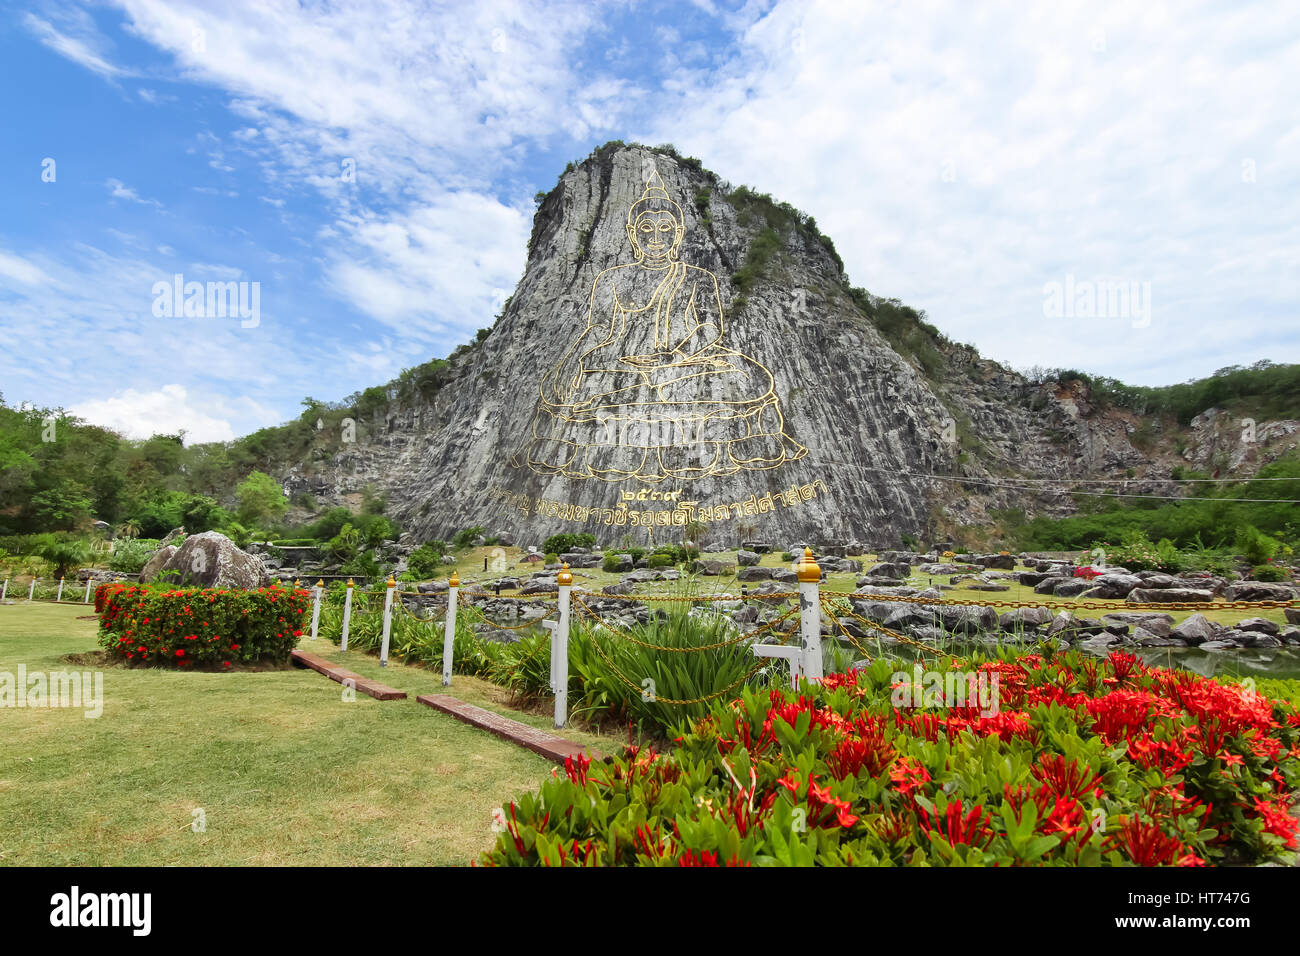 The Great Carved Buddha Sculptural Image in Chonburi, Thailand Stock Photo